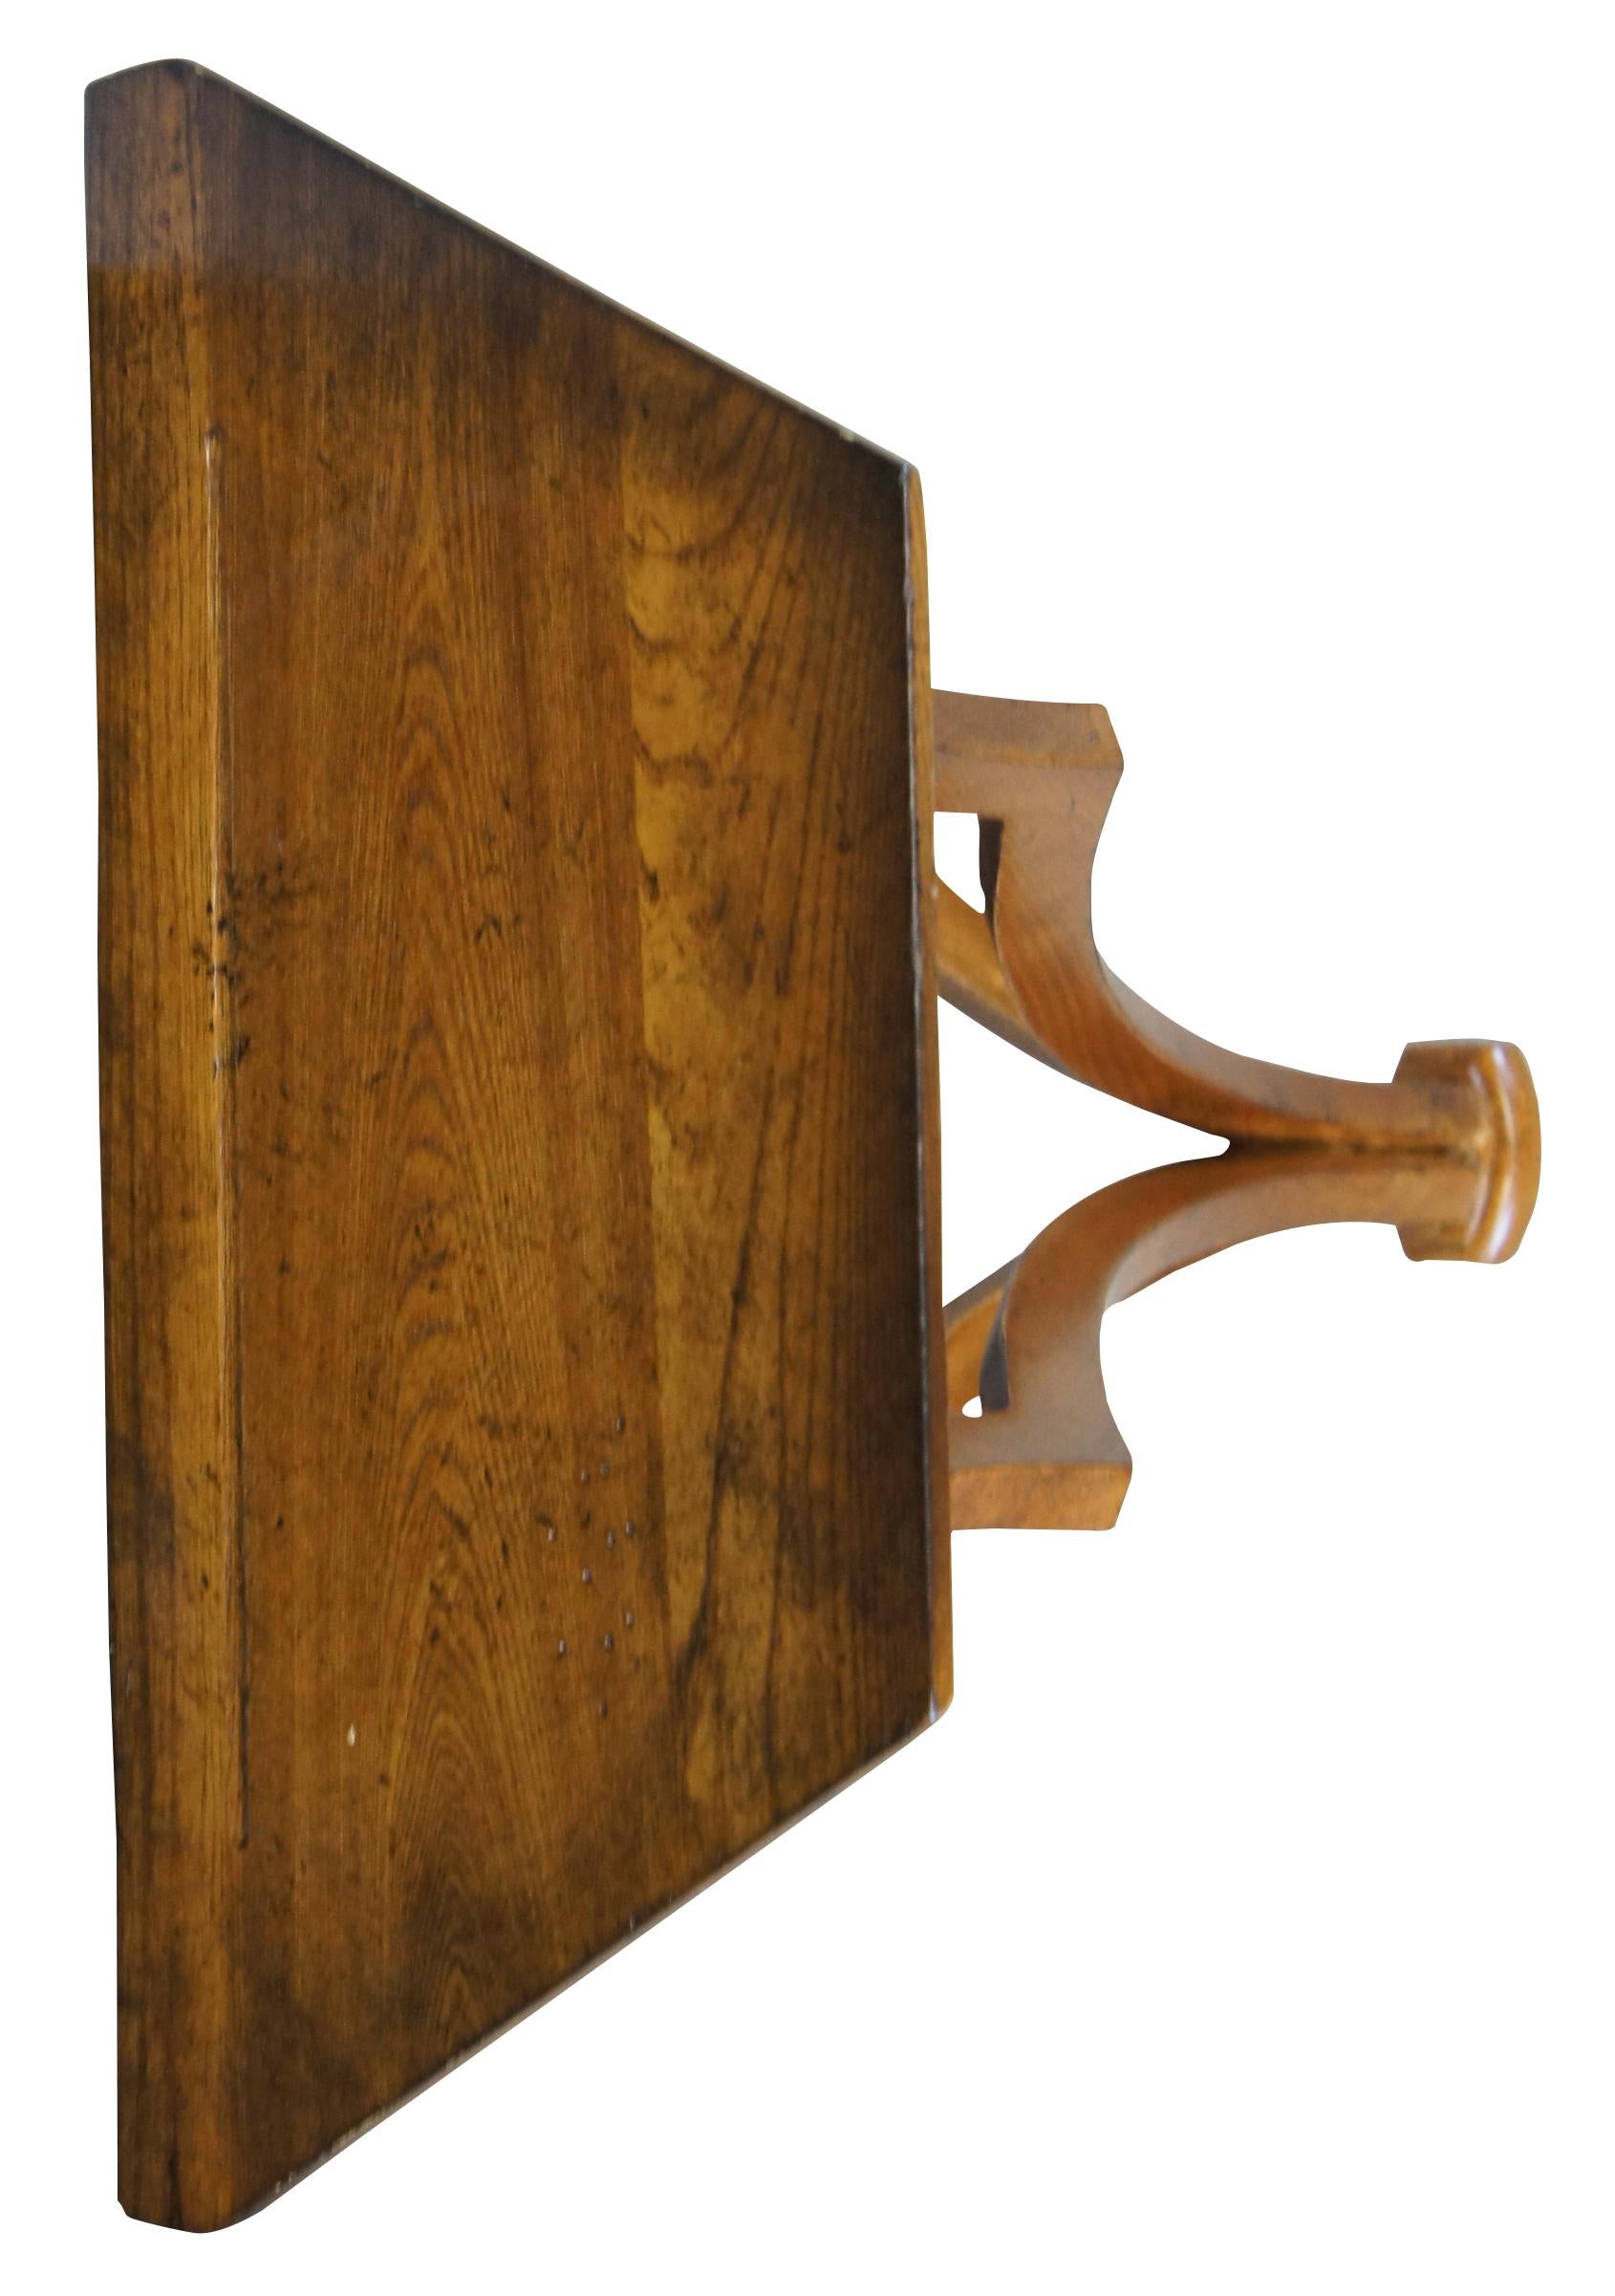 Gothic Revival 2 Global Views Gothic Modern Oak Wall Hanging Shelf Sconce Architectural Pair